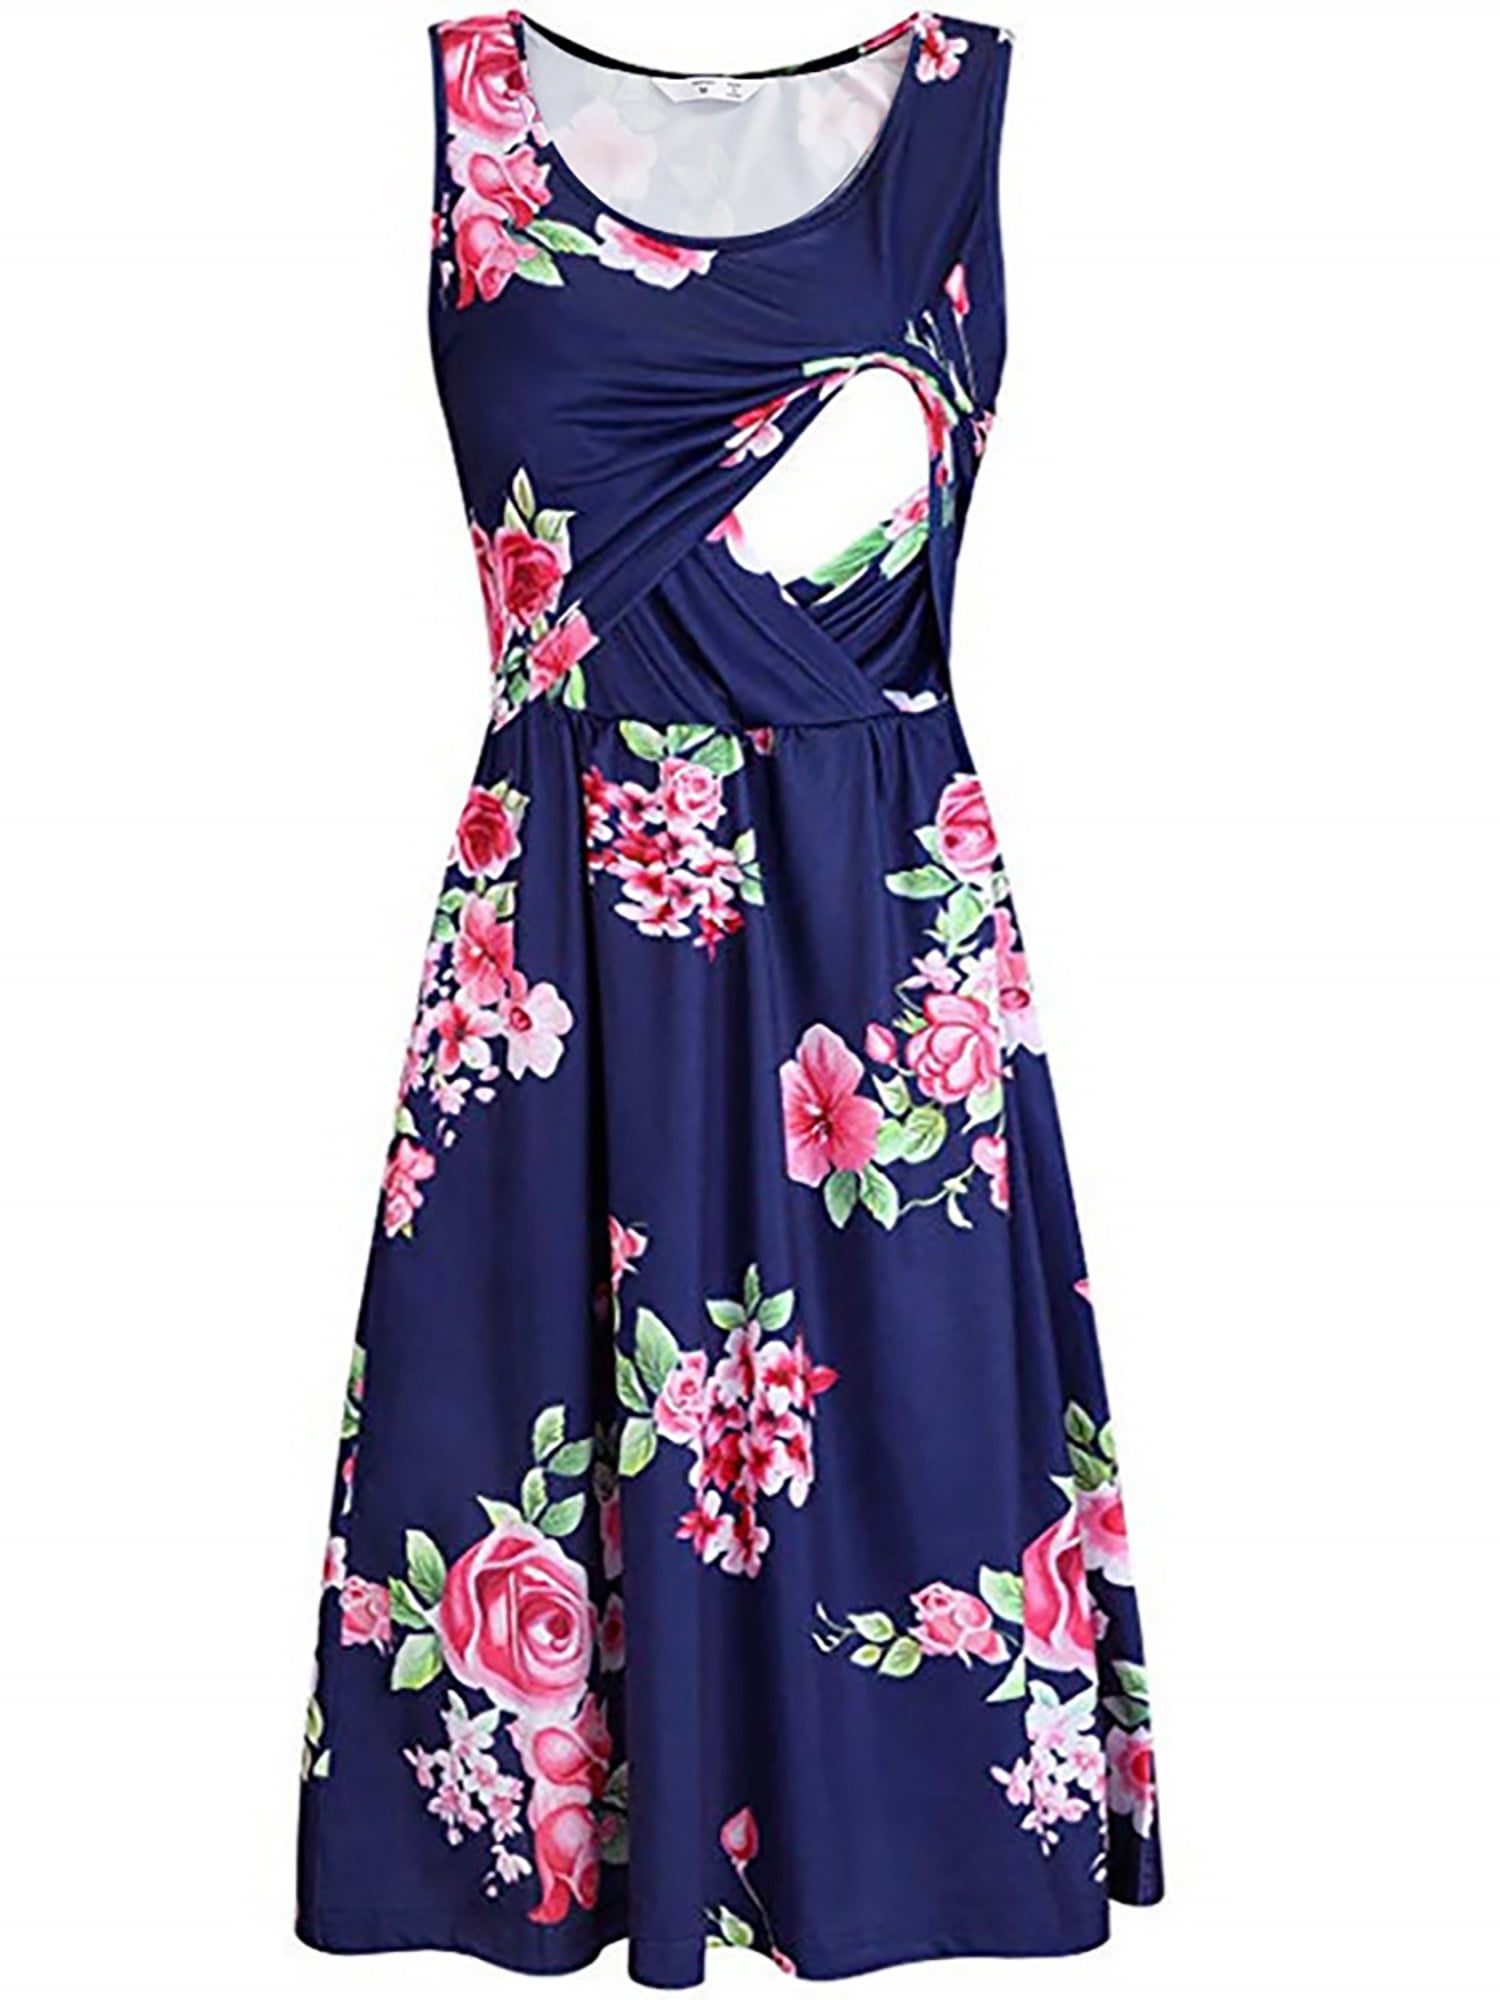 OUGES Womens Solid/Floral Maternity Dresses Nursing Gown Breastfeeding Clothes 